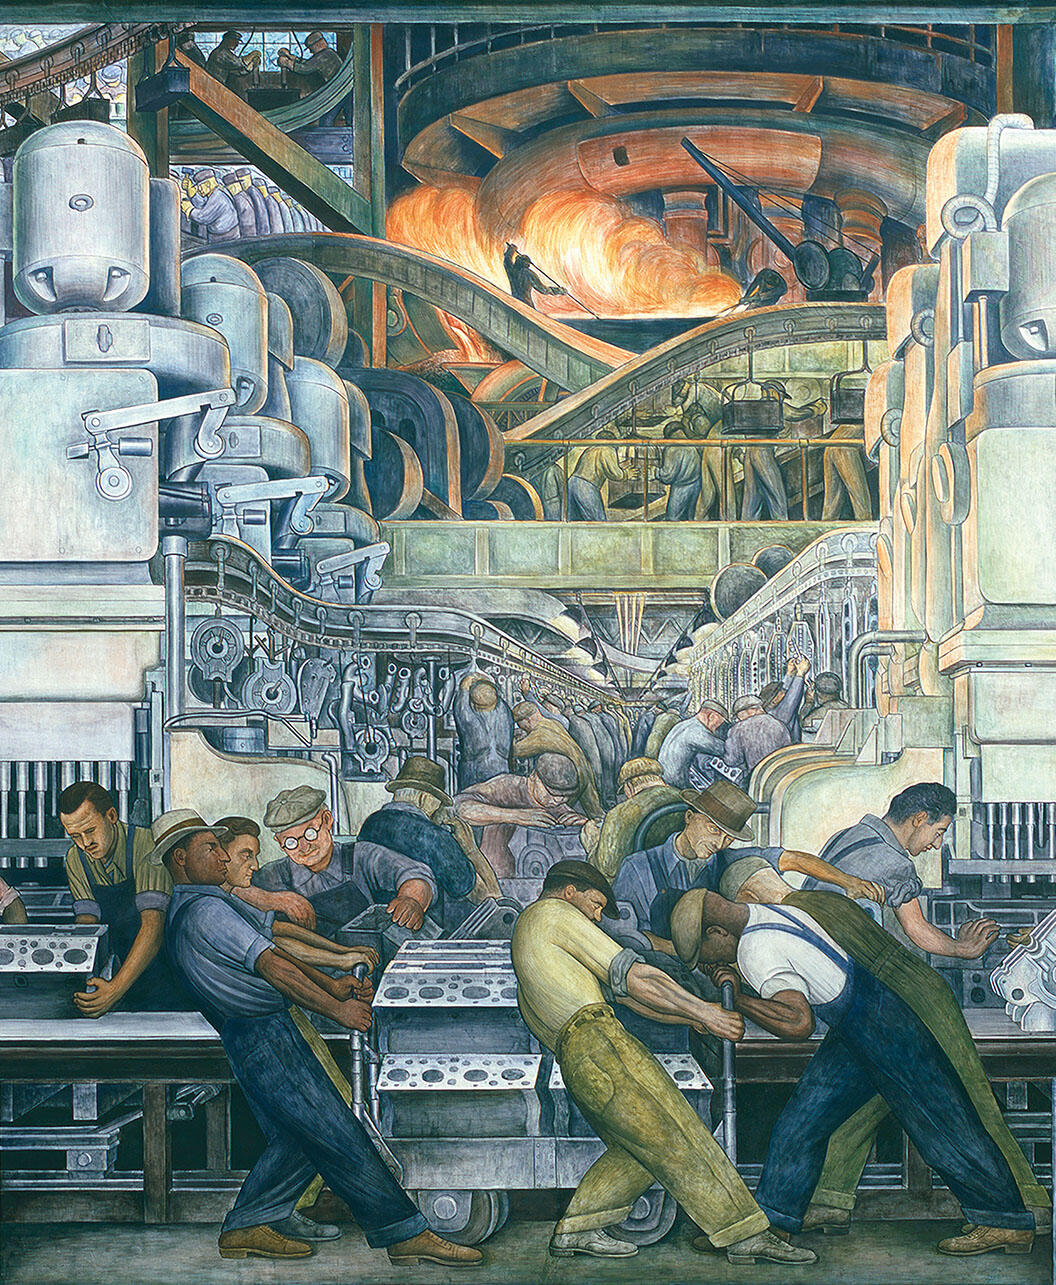 Detail from “Detroit Industry,” north wall, showing workers machining engine blocks. (Image courtesy of the Detroit Institute of Arts.)